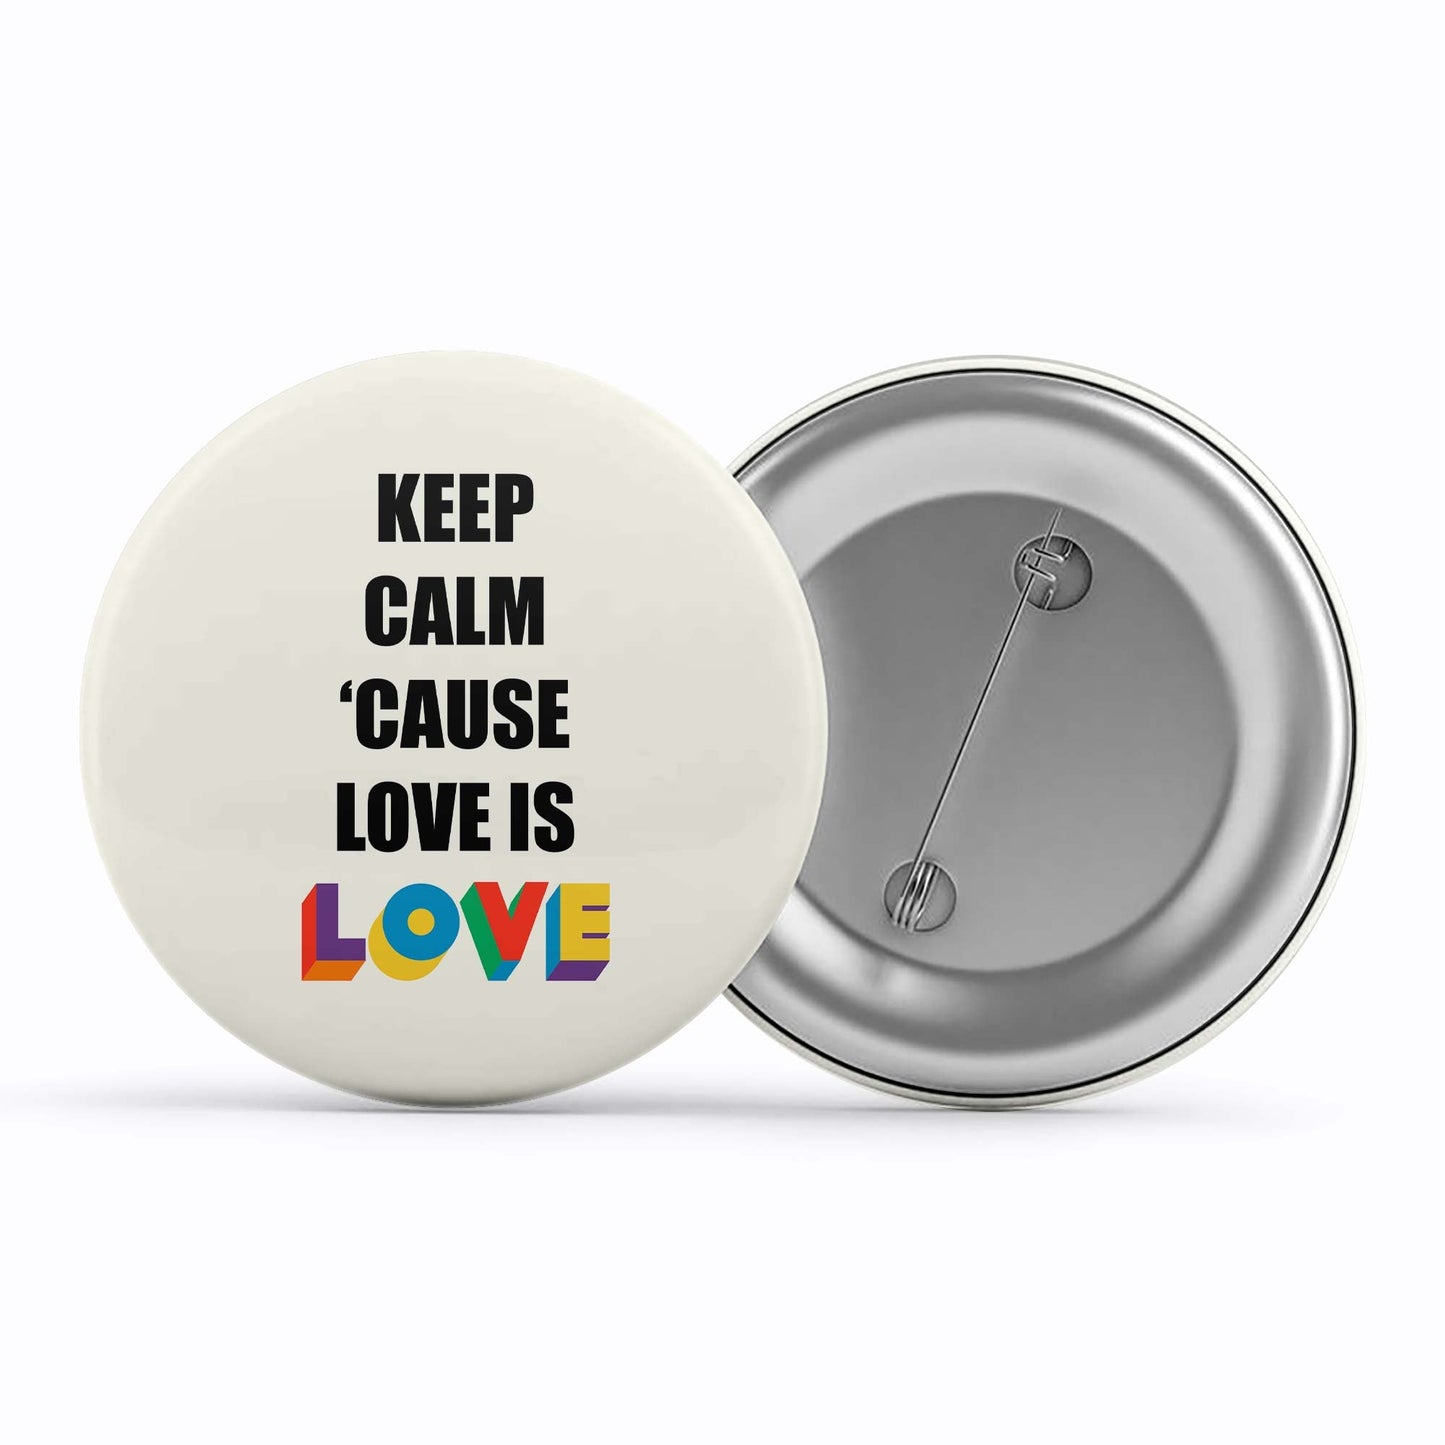 pride keep calm because love is love badge pin button printed graphic stylish buy online india the banyan tee tbt men women girls boys unisex  - lgbtqia+